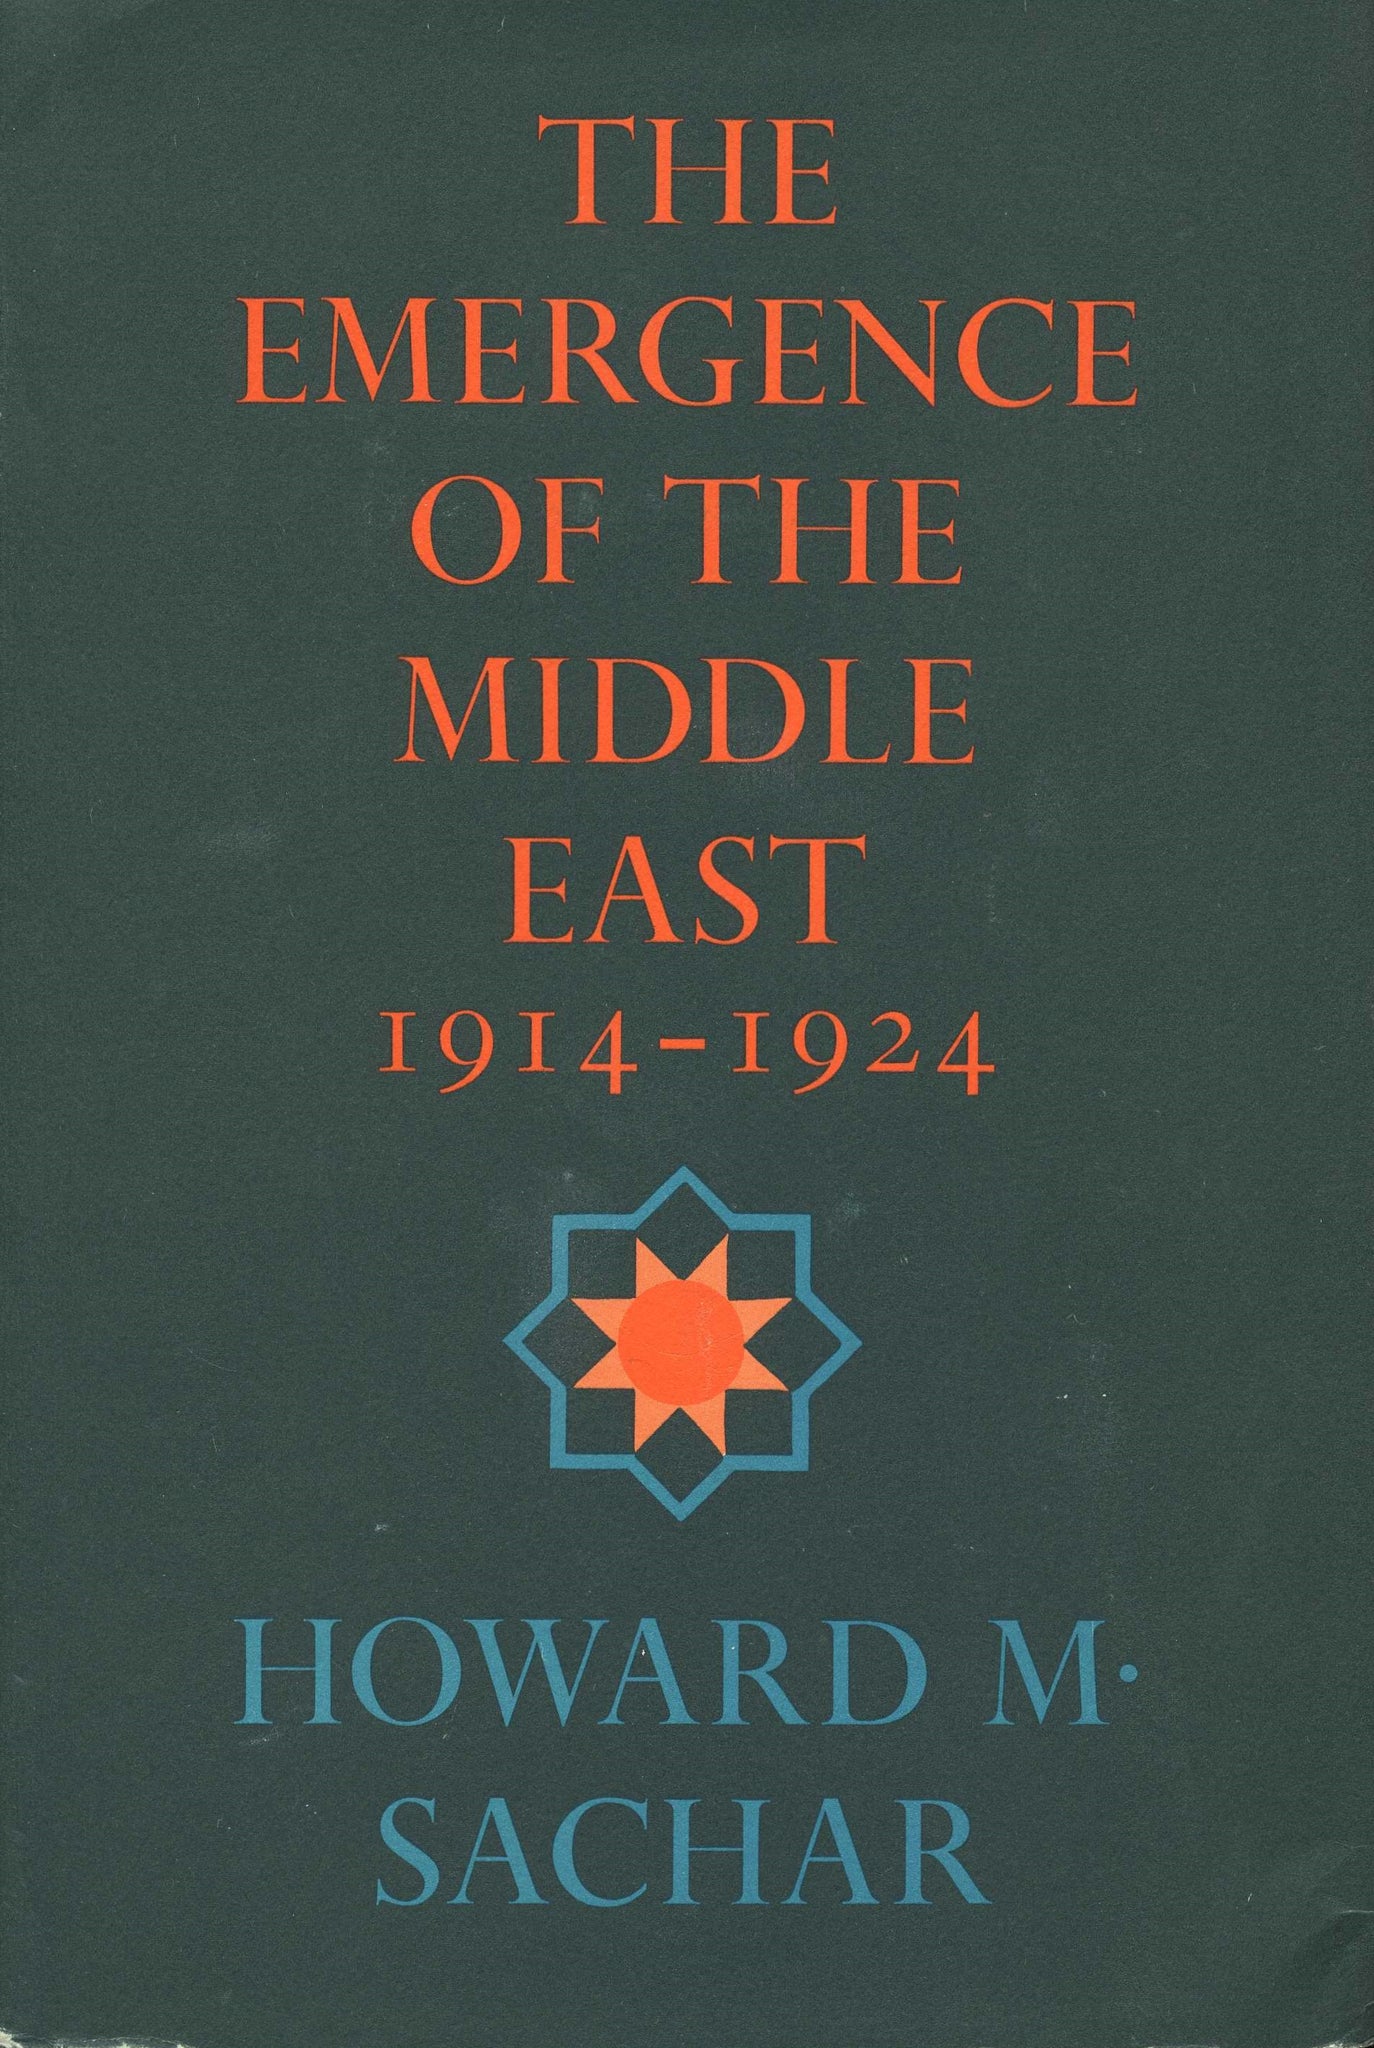 EMERGENCE OF THE MIDDLE EAST 1914-1924, THE